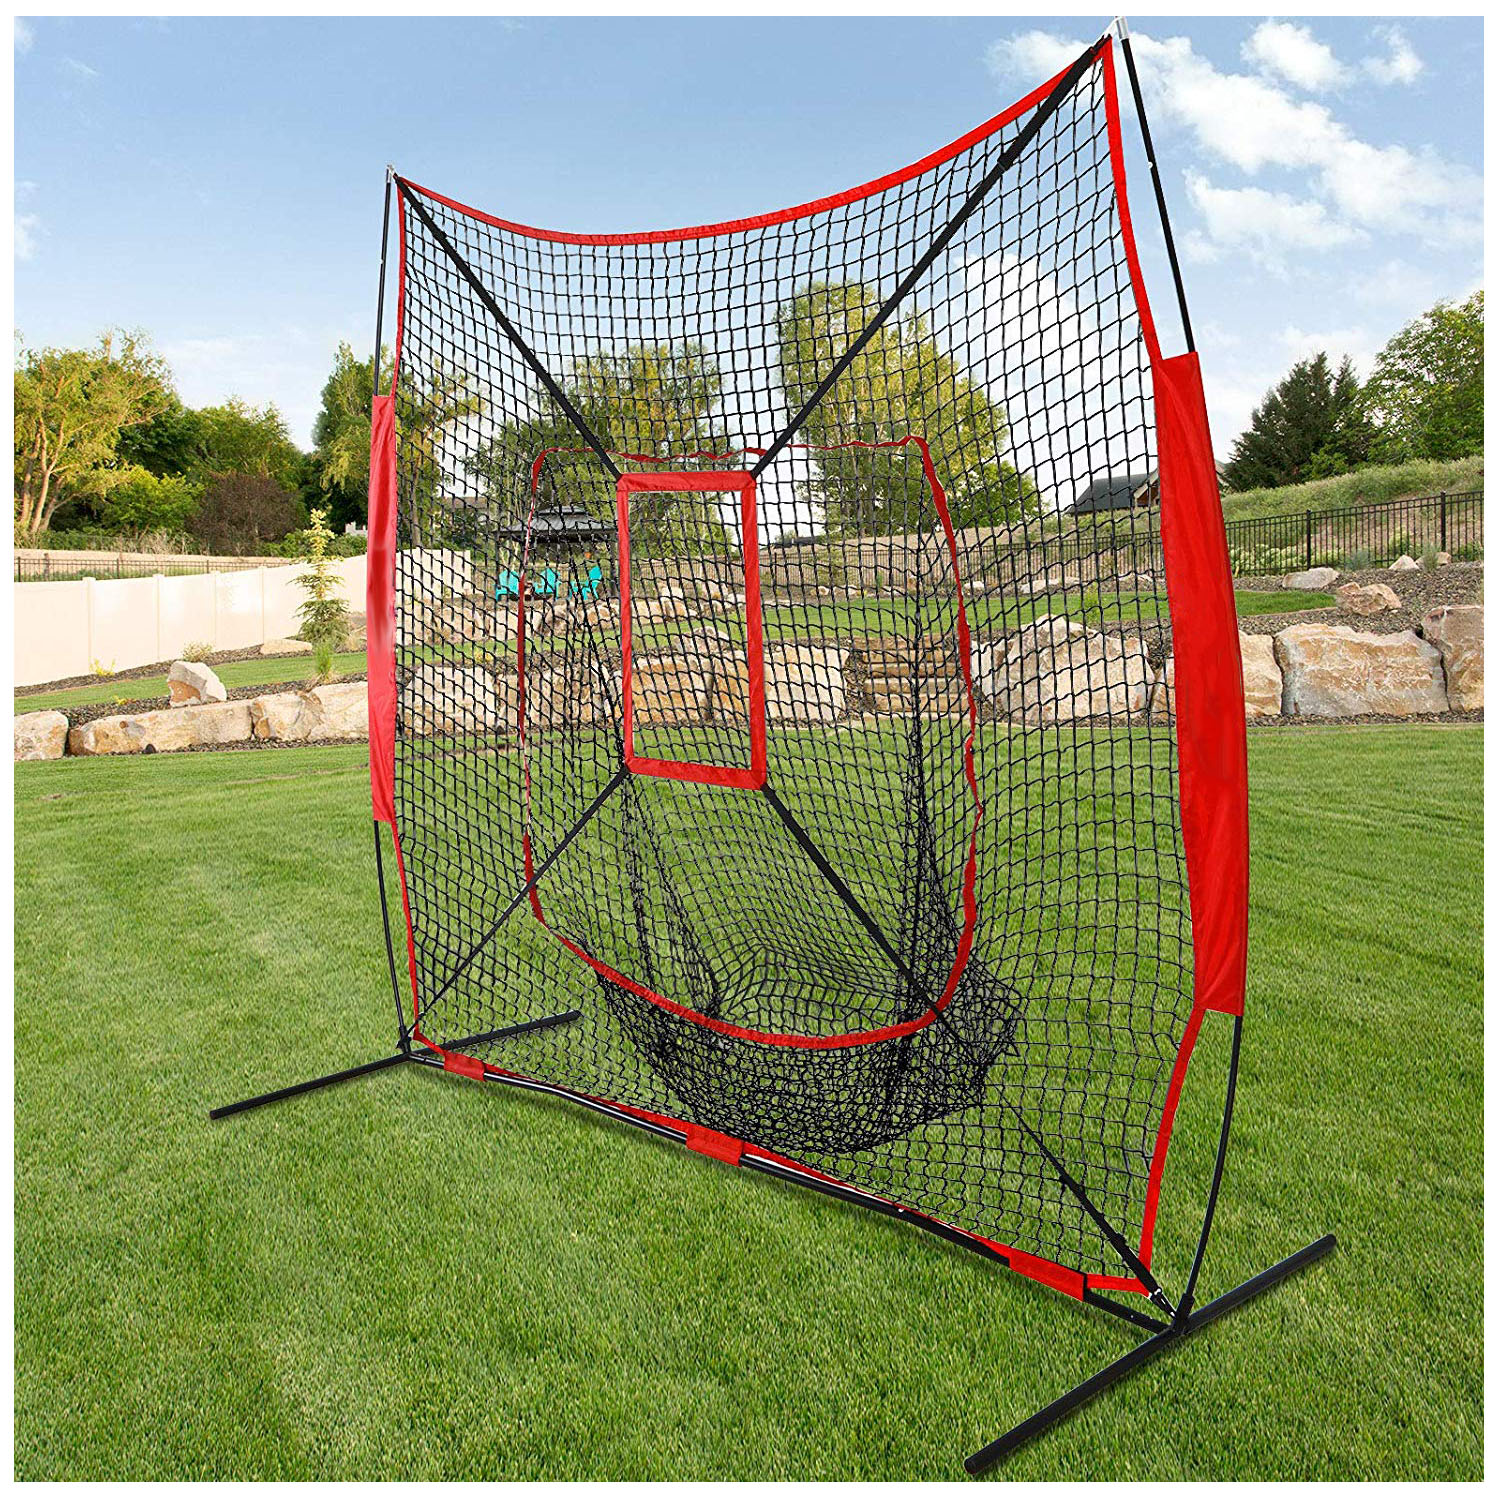 Factory Price Baseball Softball Practice Hitting Net 7*7\' For Batting and Pitching with Carry Bag and Metal Frame